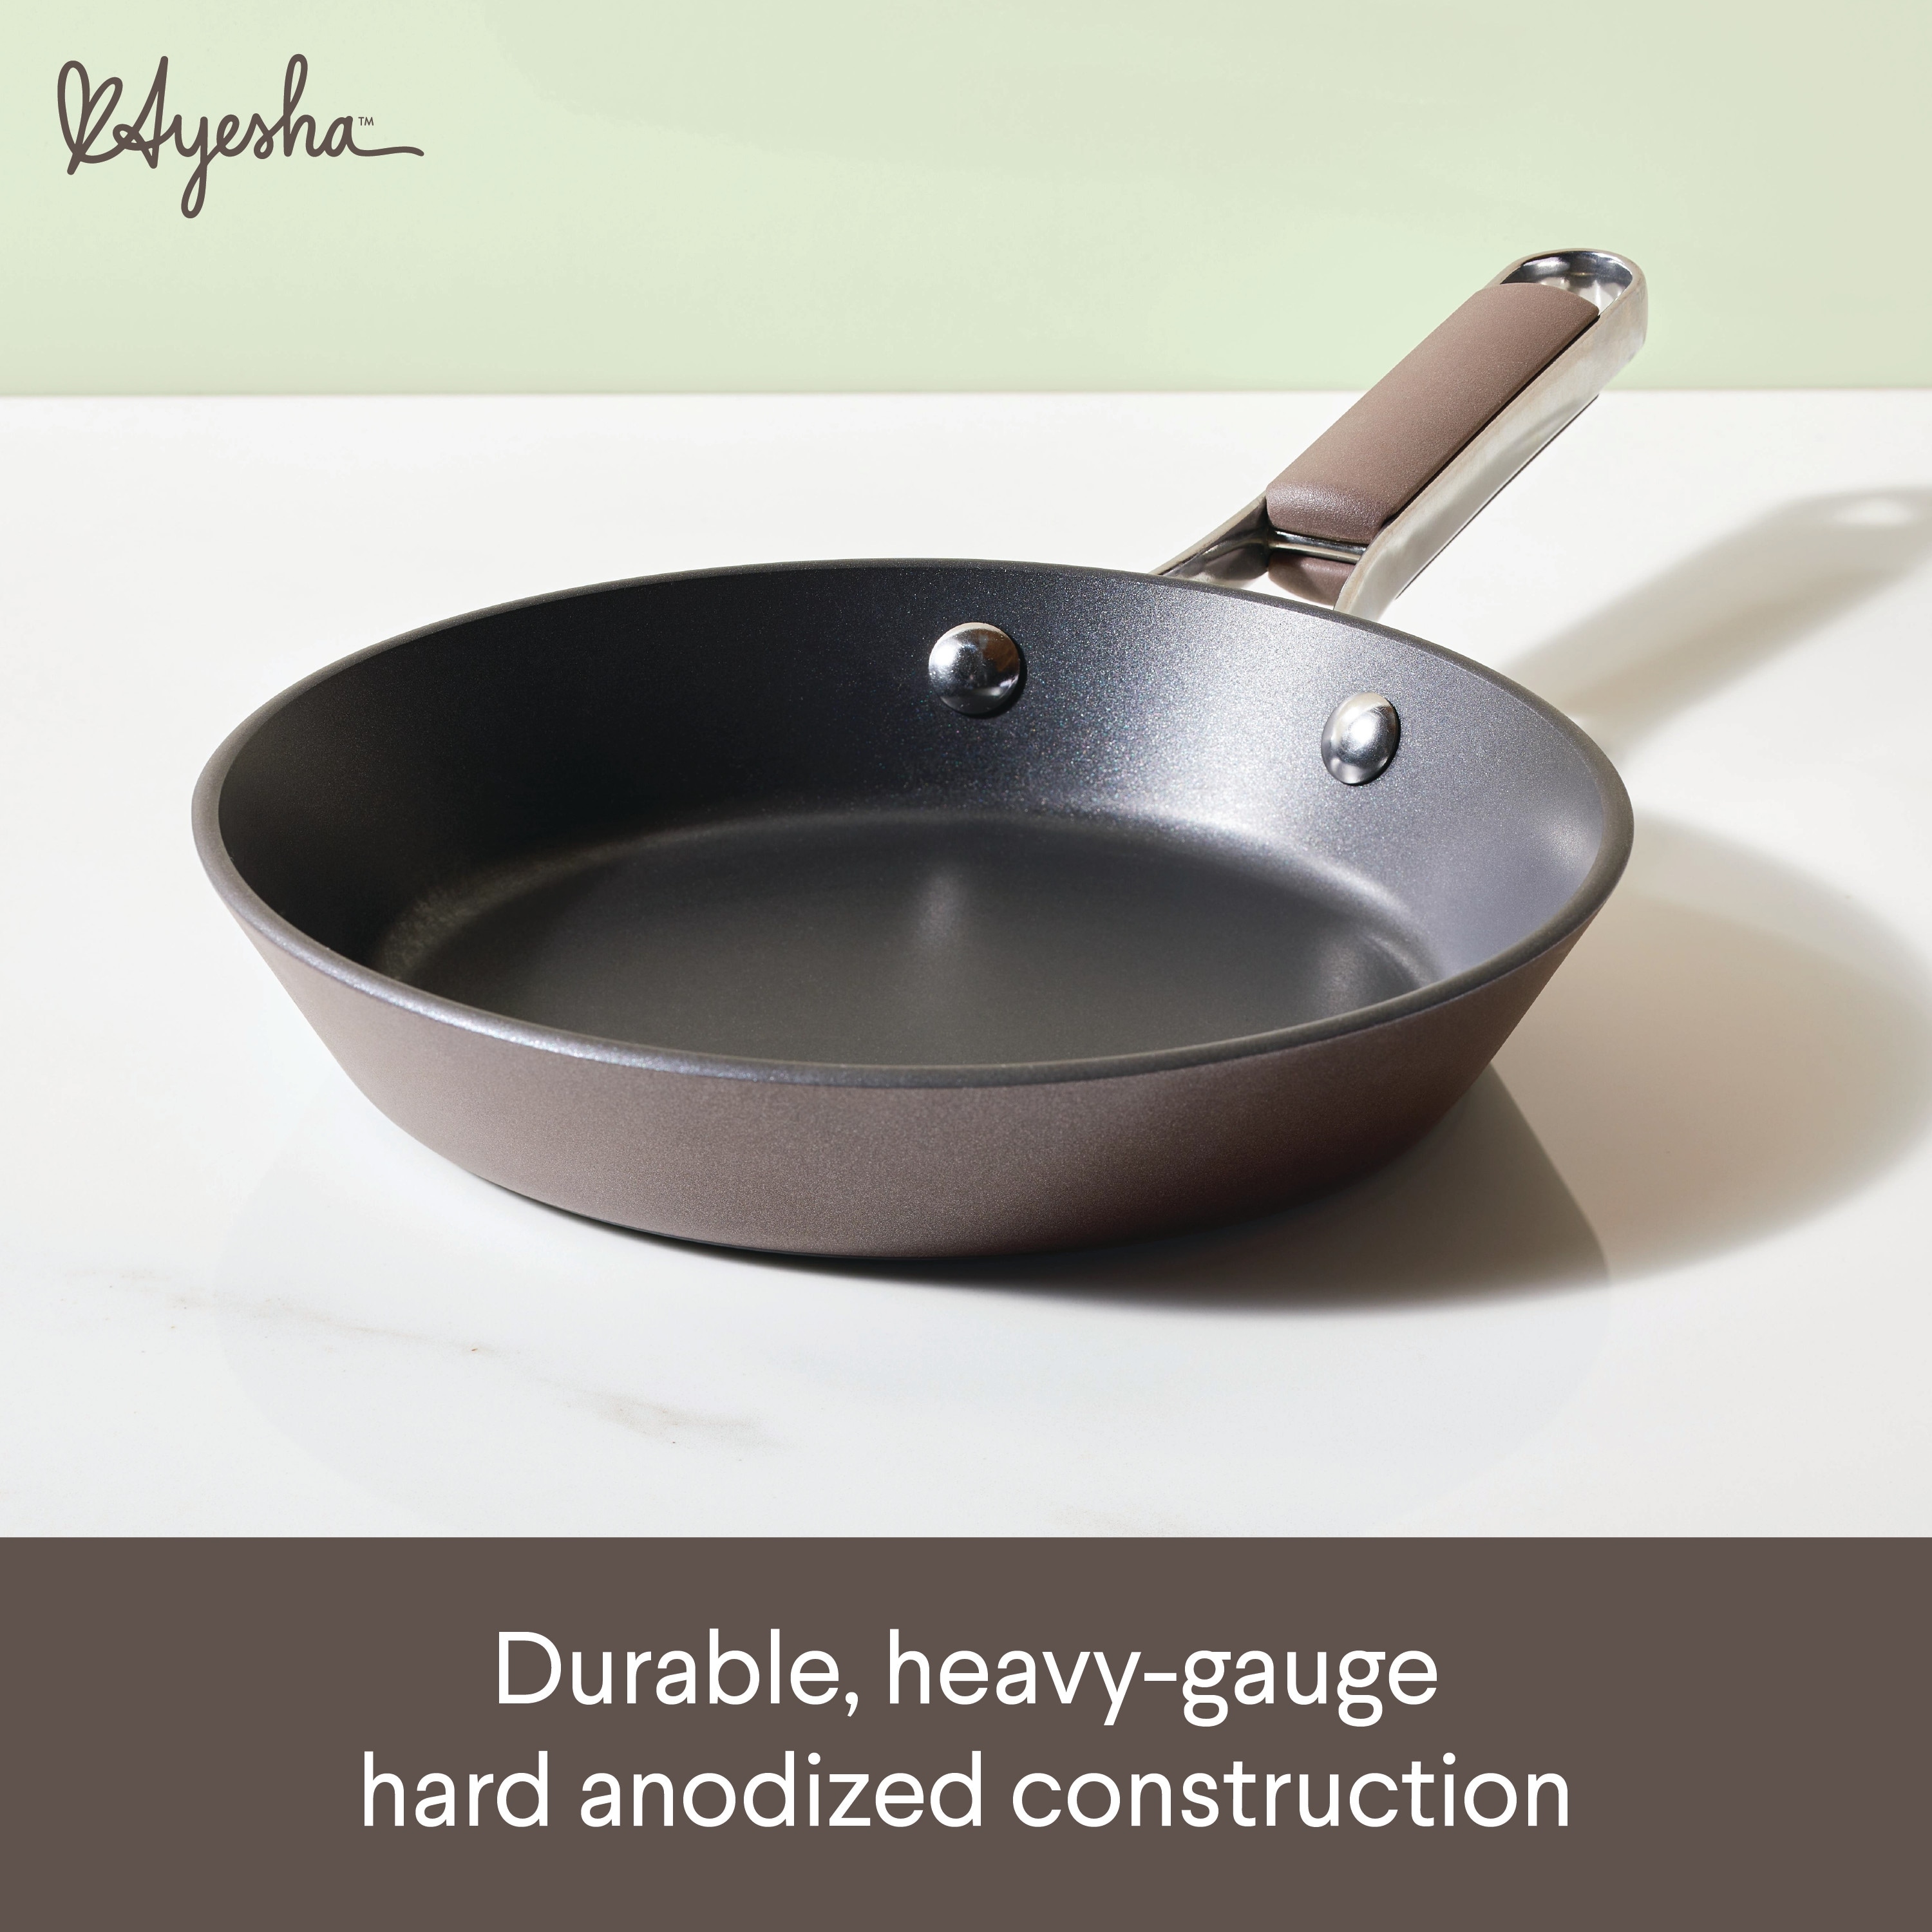 https://ak1.ostkcdn.com/images/products/is/images/direct/bbfd2077f53da67ebc7a66f1c4f59b8a7fedabad/Ayesha-Curry-Hard-Anodized-Collection-Nonstick-Frying-Pan%2C-8.25-Inch%2C-Charcoal.jpg